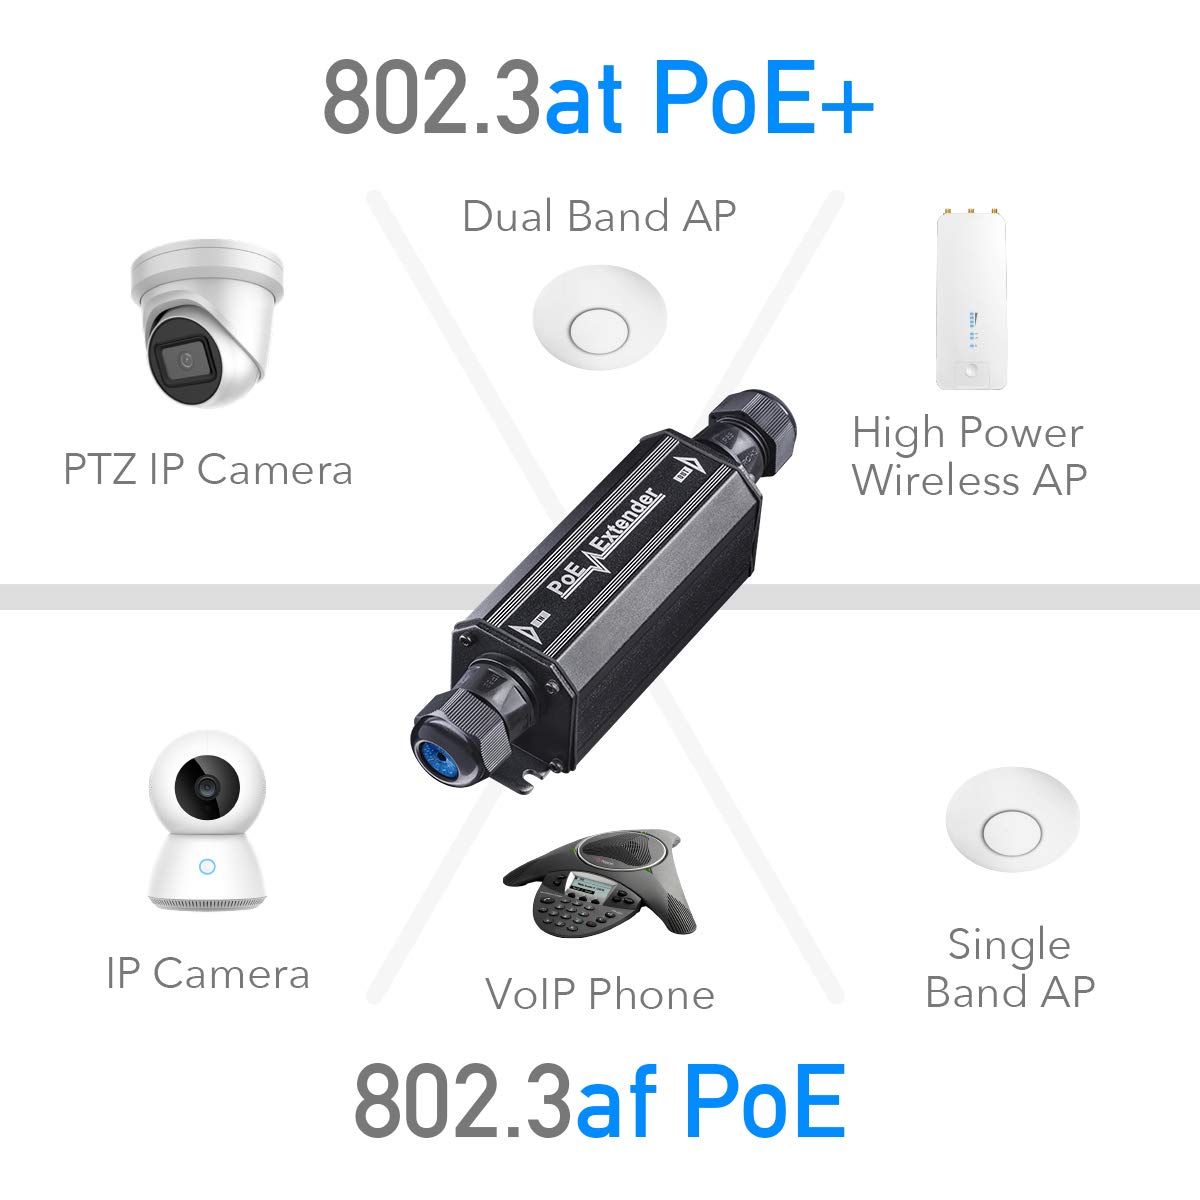 Cudy POE15 Gigabit Outdoor IP67 Waterproof PoE+ Extender, 10/100/1000Mbps?1 Channel PoE Repeater, PoE Amplifier, PoE booster, Wall-Mount, Daisy chain, Comply with IEEE 802.3at / 802.3af, Metal Housing